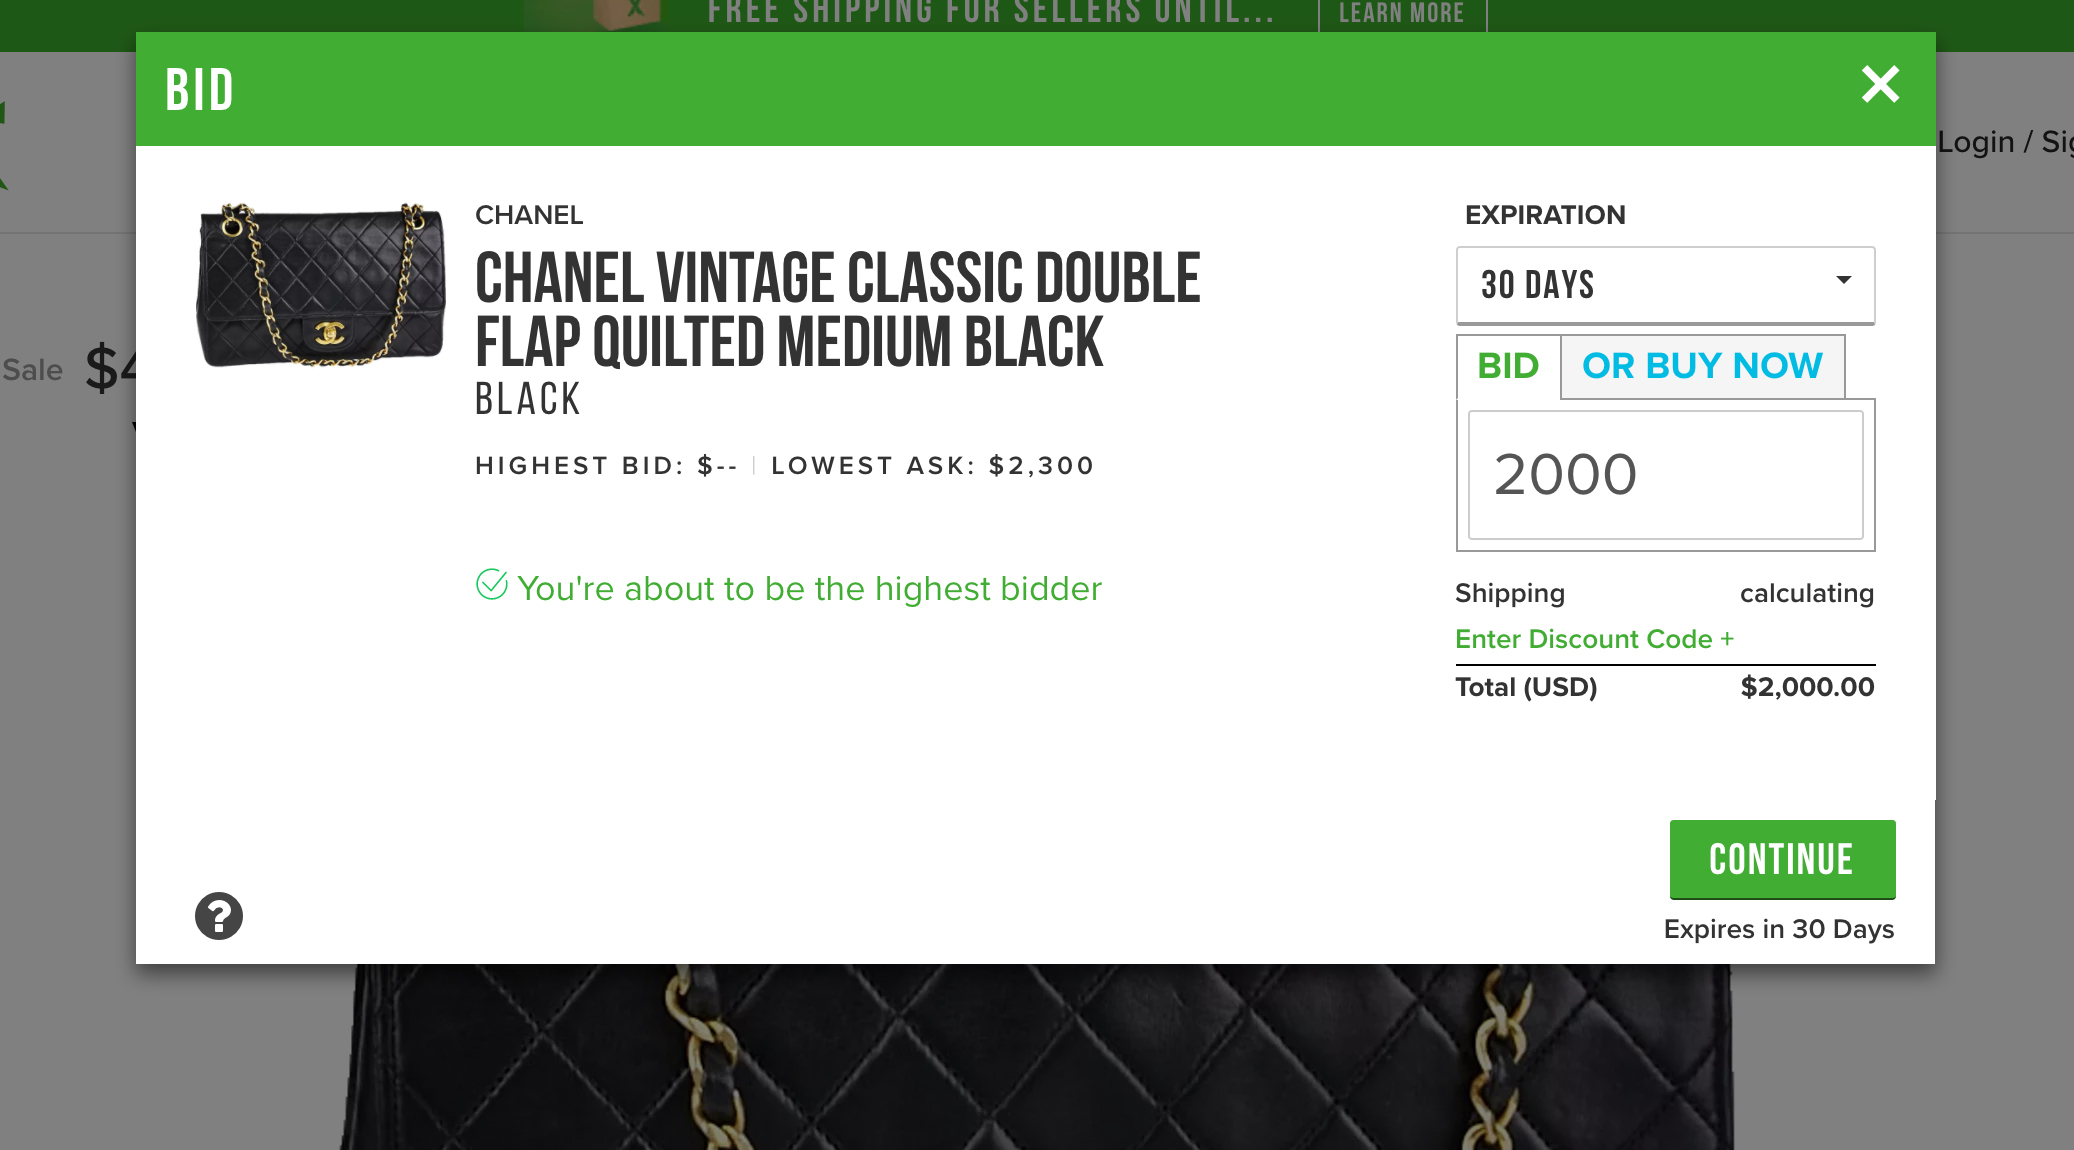 Chanel Resale Value & How to Maximize Profits - Academy by